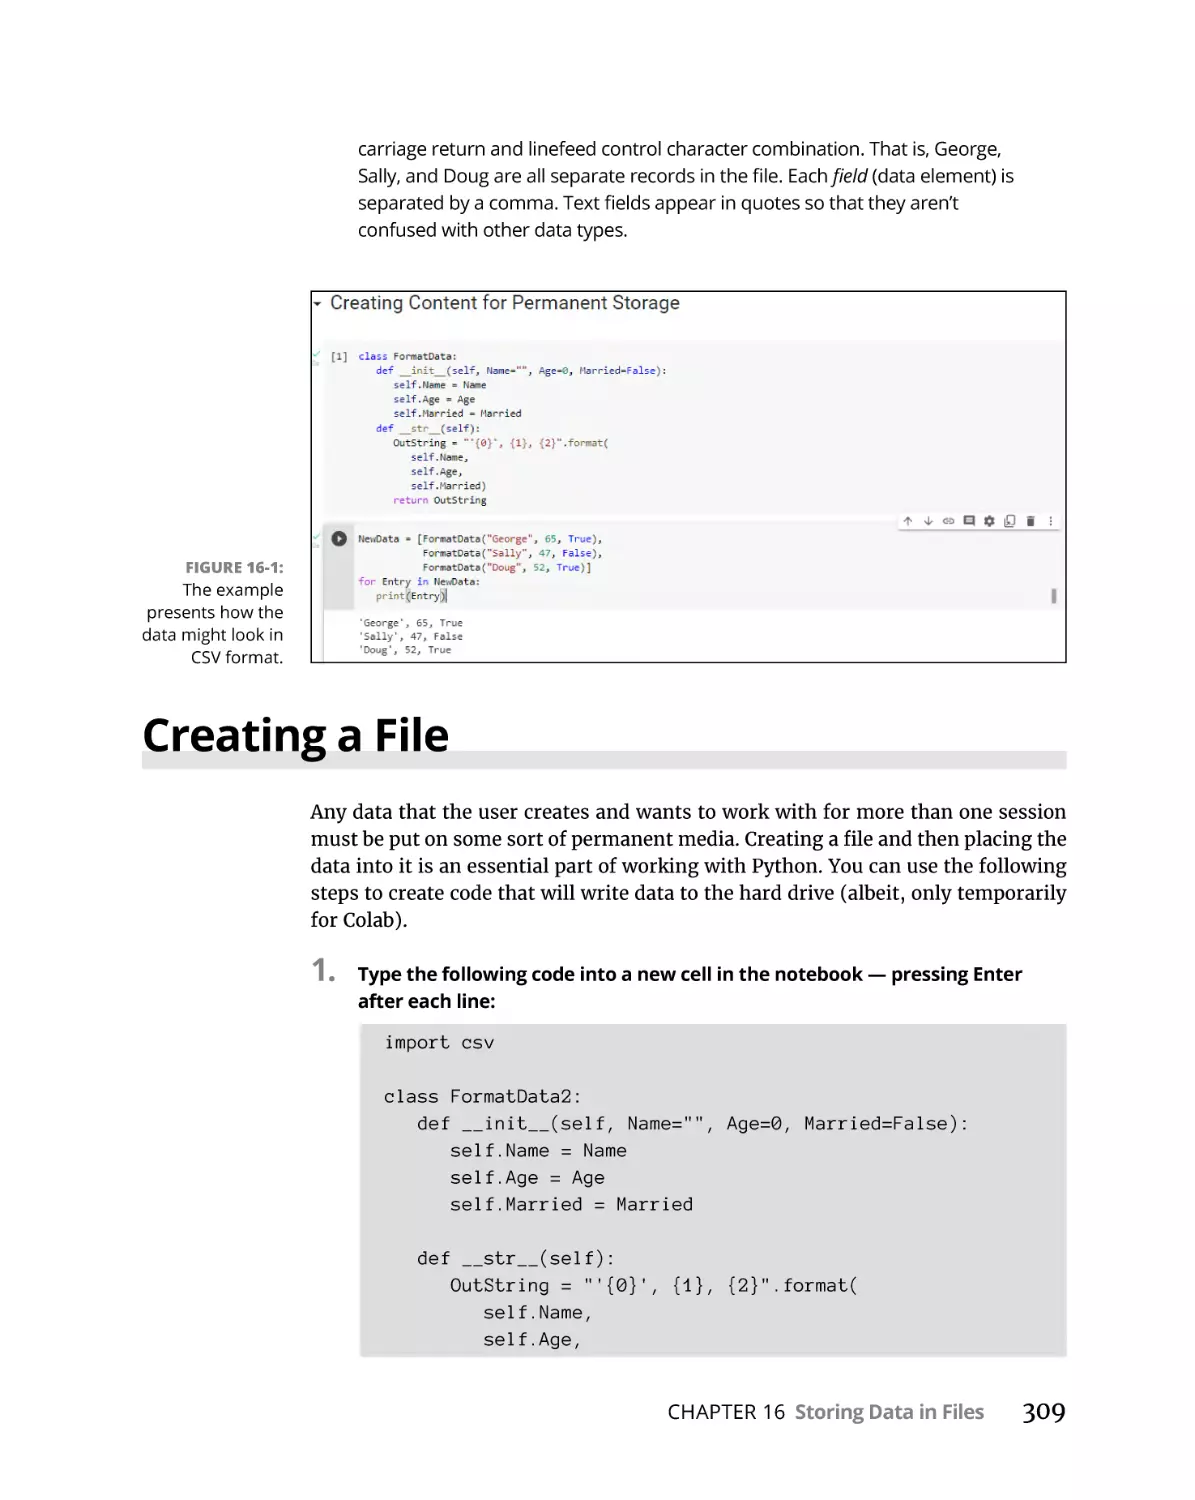 Creating a File